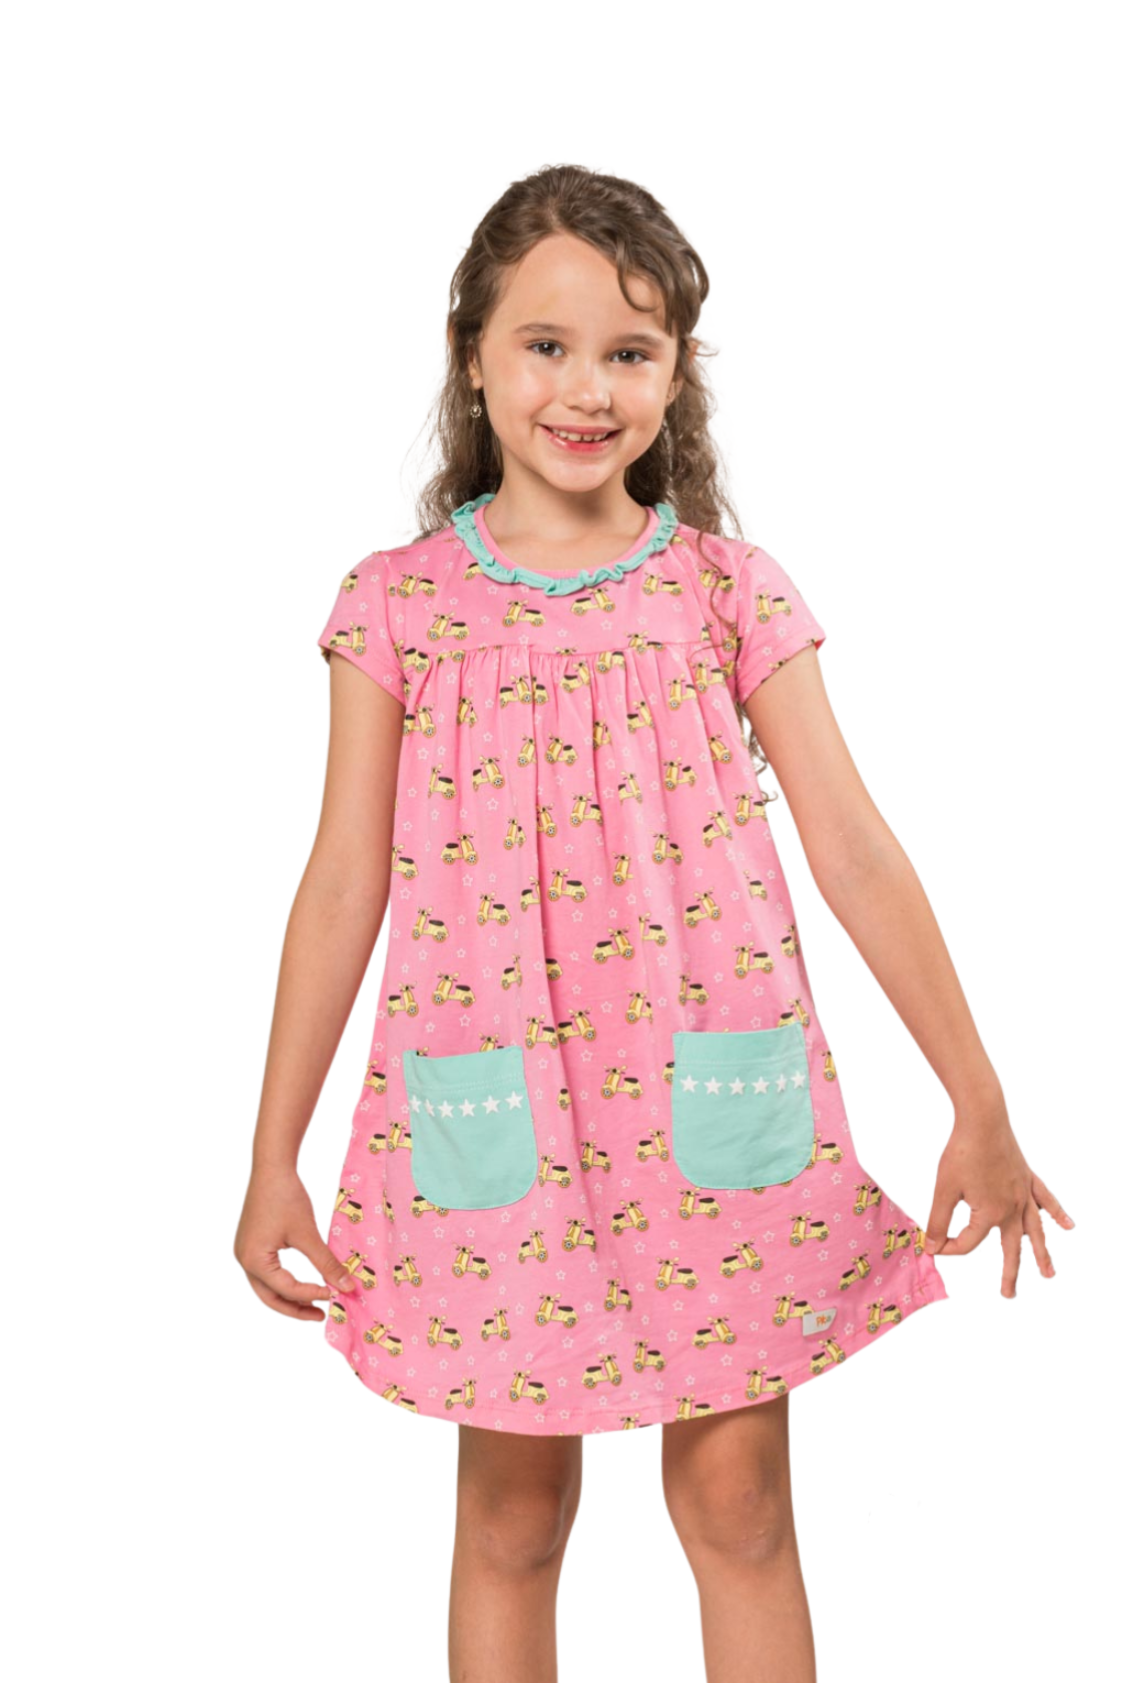 Girl dress in pink vespas and stars with pockets in front, Non-stereotypical styles, sustainable materials